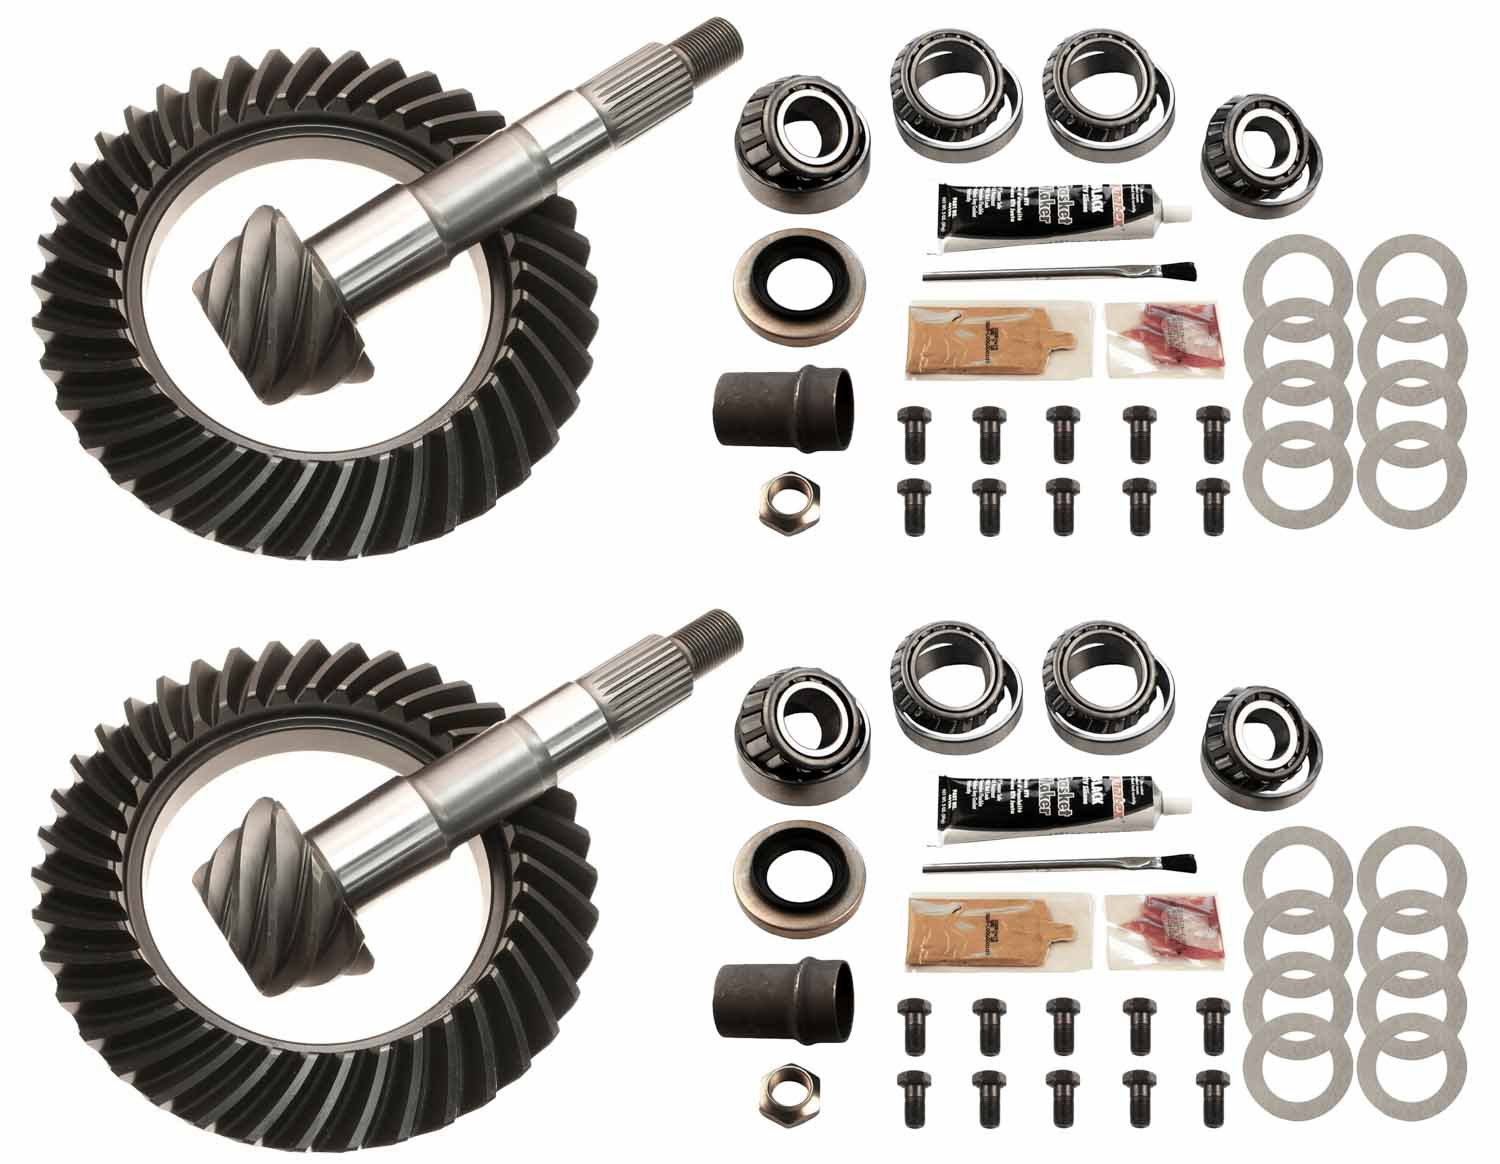 Complete Front and Rear Ring and Pinion Kit 1979-1985 Toyota Pickup 4-Cylinder, 1984-1985 Toyota 4Runner 4-Cylinder - 5:71 Ratio